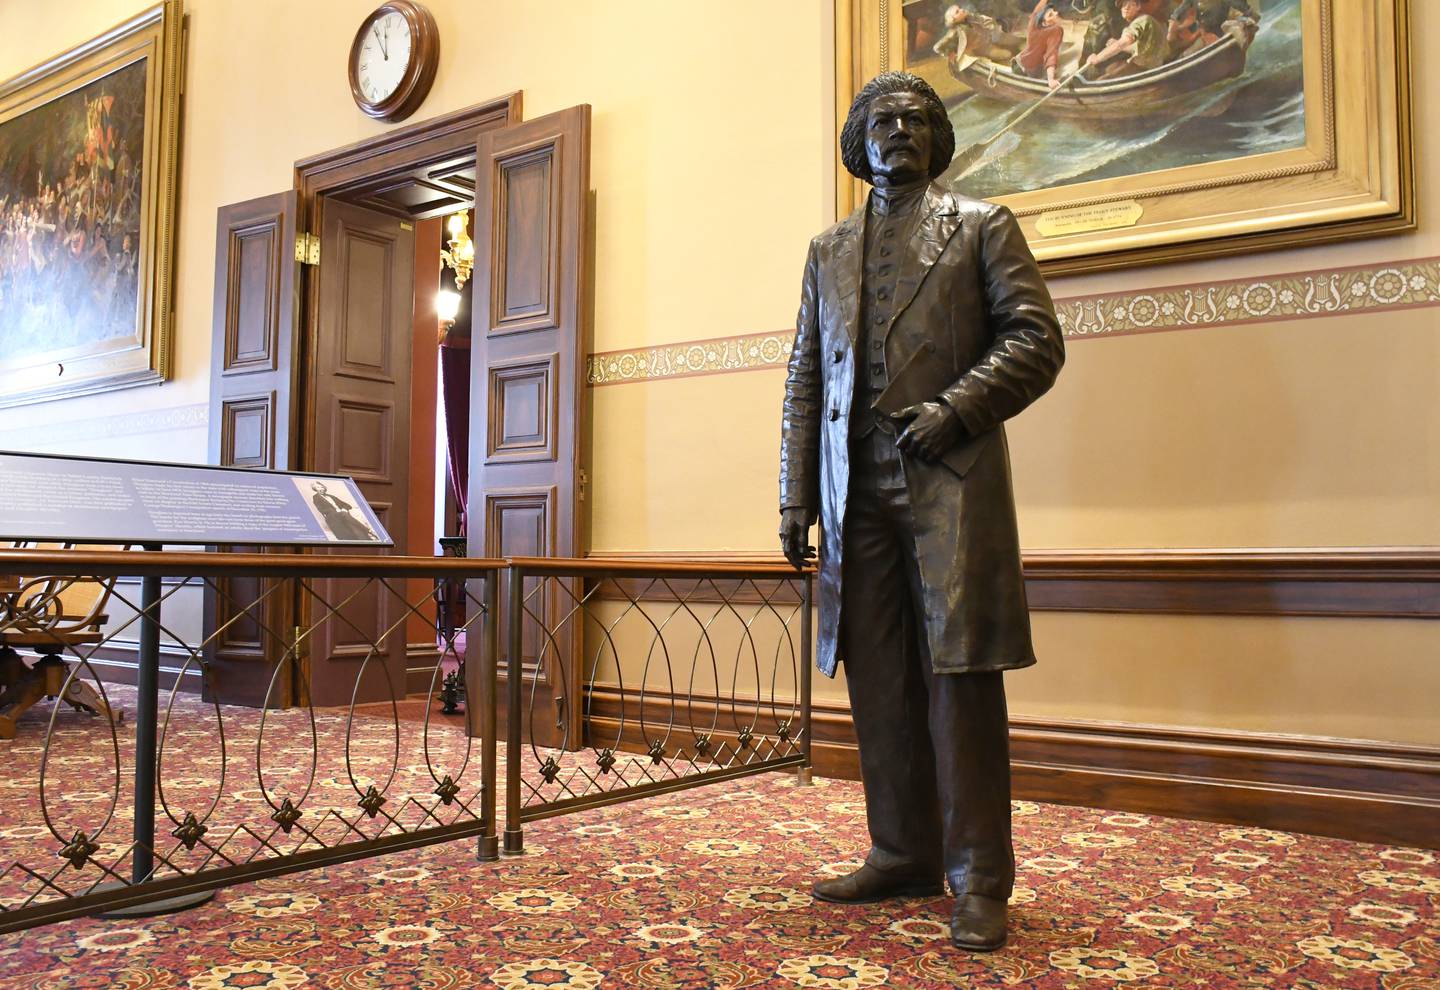 Abolitionist Frederick Douglass is honored with a bronze statue in the Old House of Delegates Chamber in the Maryland State House in Annapolis.